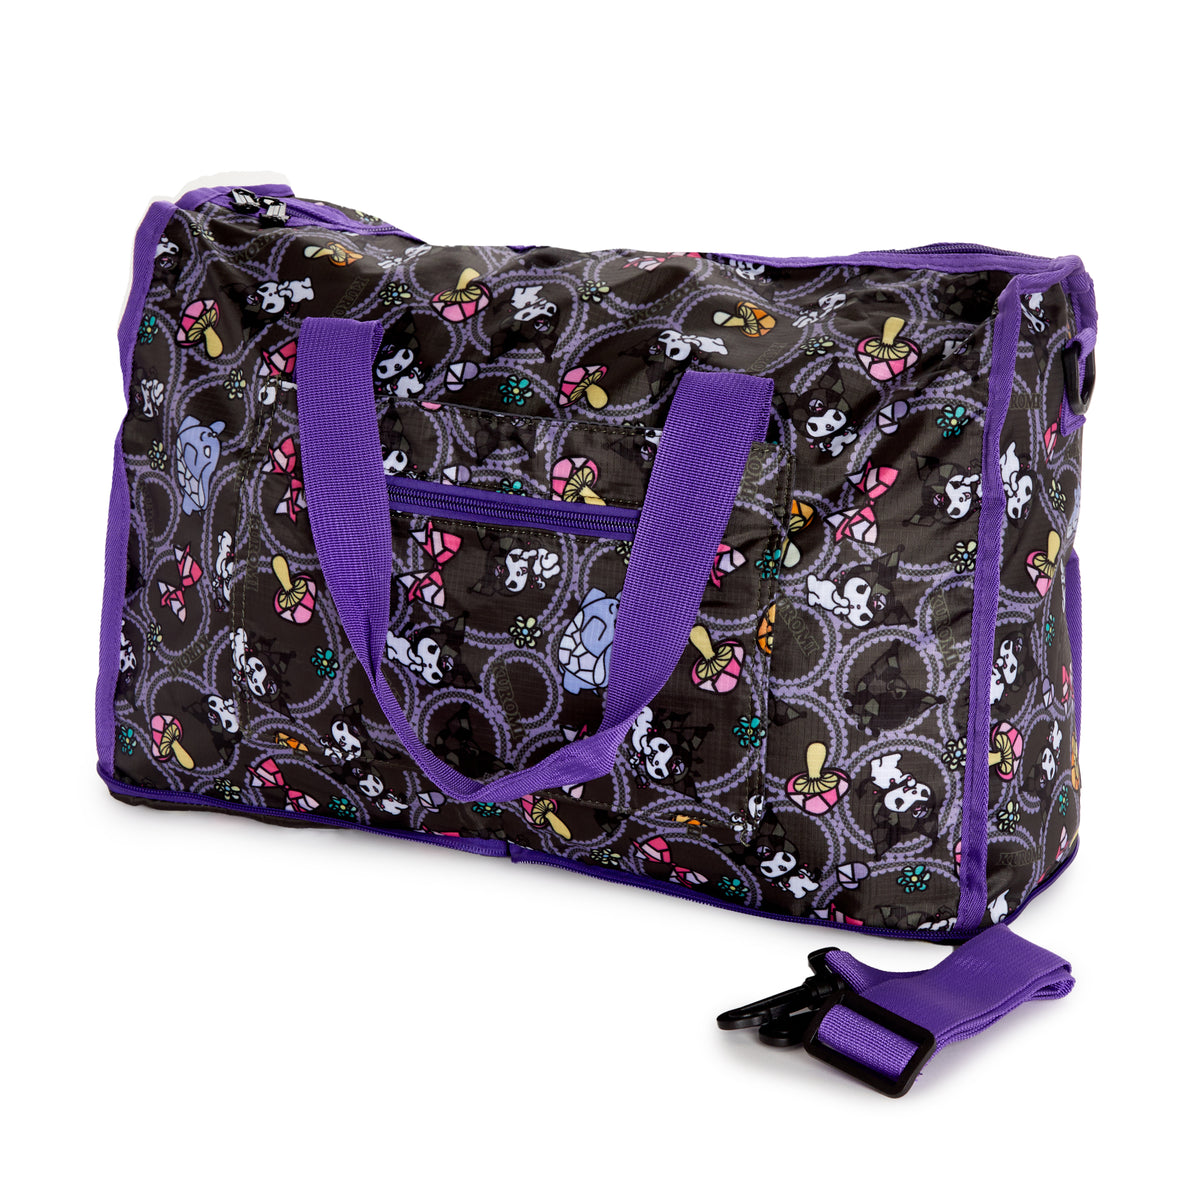 Skater Kuromi Thermal Insulated Bag with Zip Closure - Pretty Journey